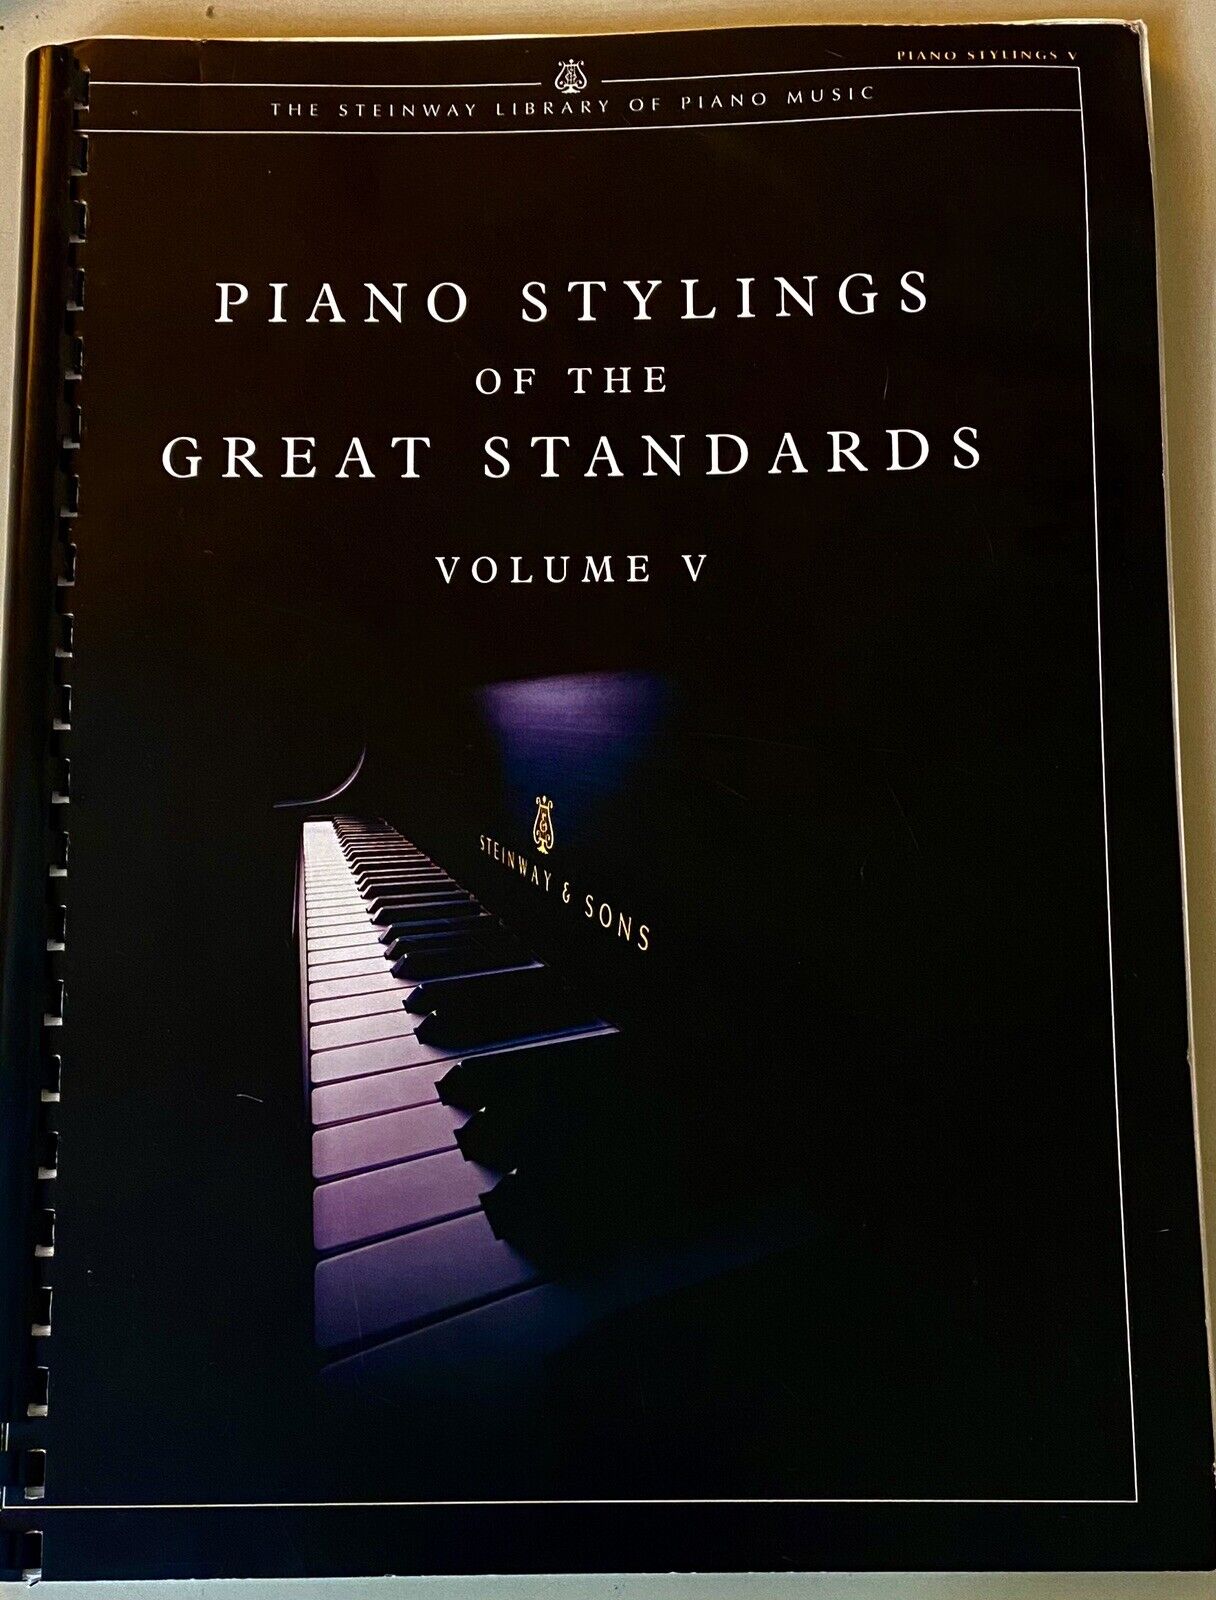 Piano Stylings of the Great Standards, Vol 5 (The Steinway Library of Piano)